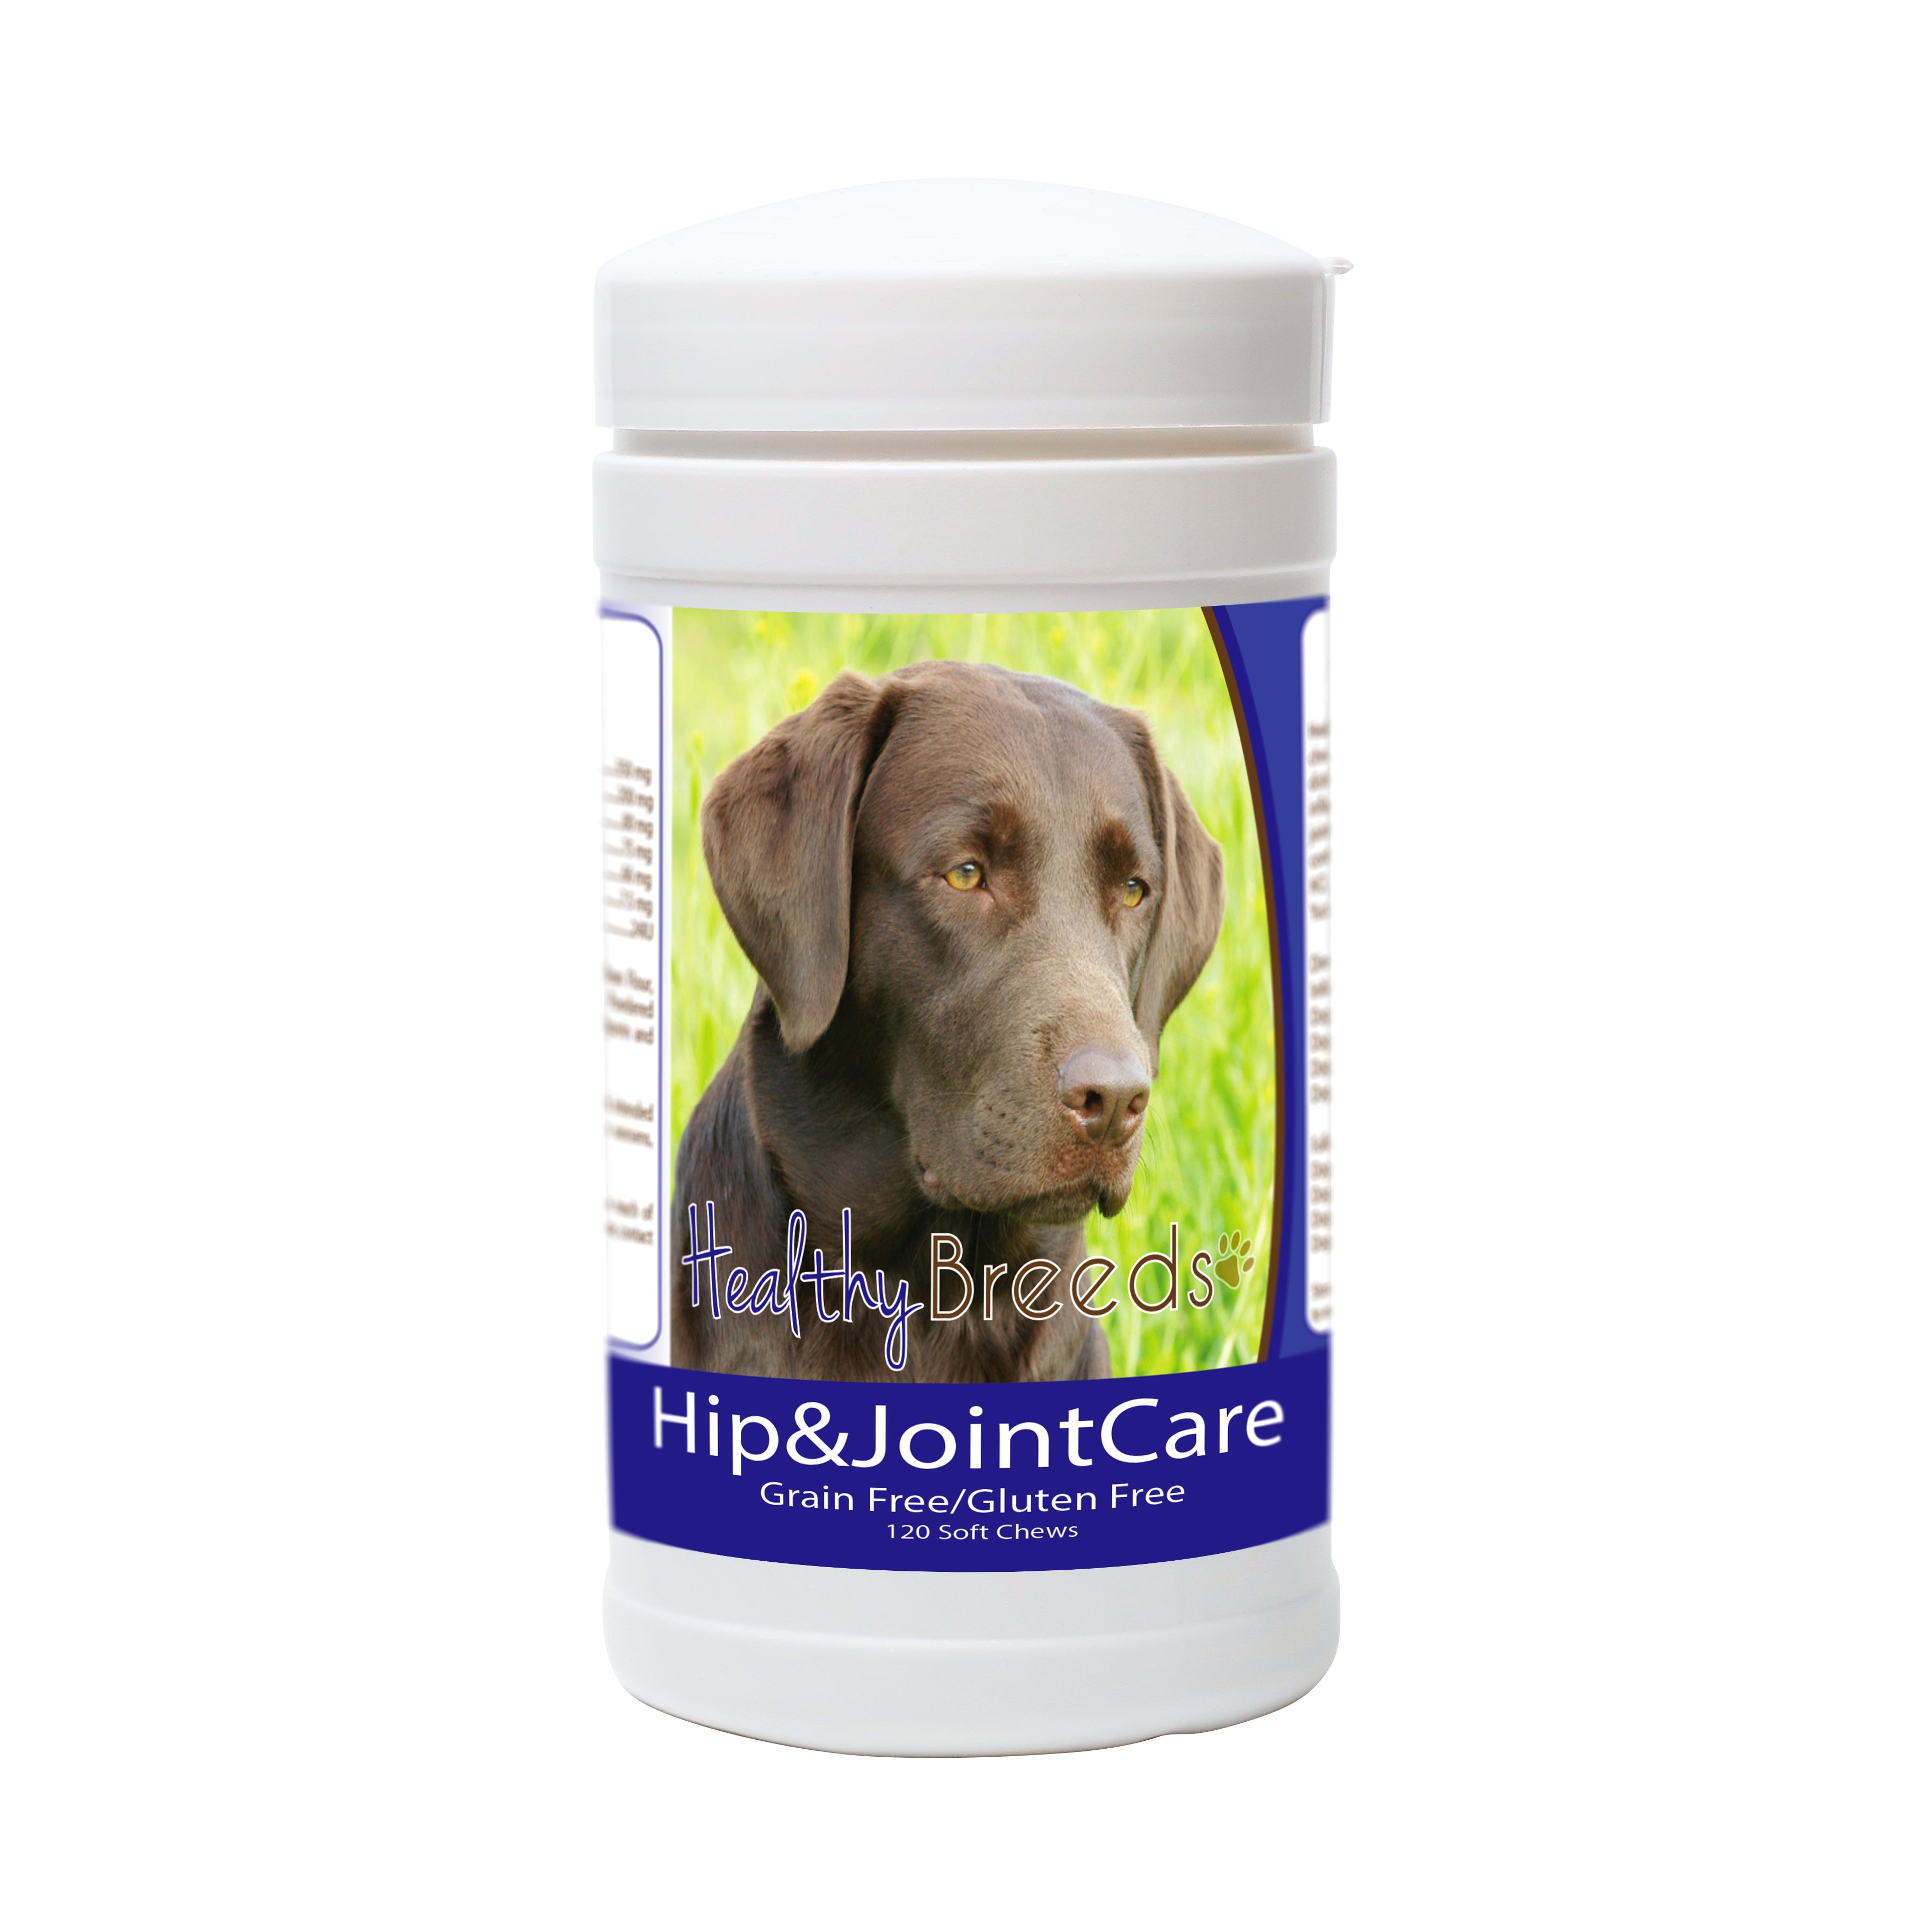 Healthy Breeds Hip & Joint Care Soft Chews - Mastiff